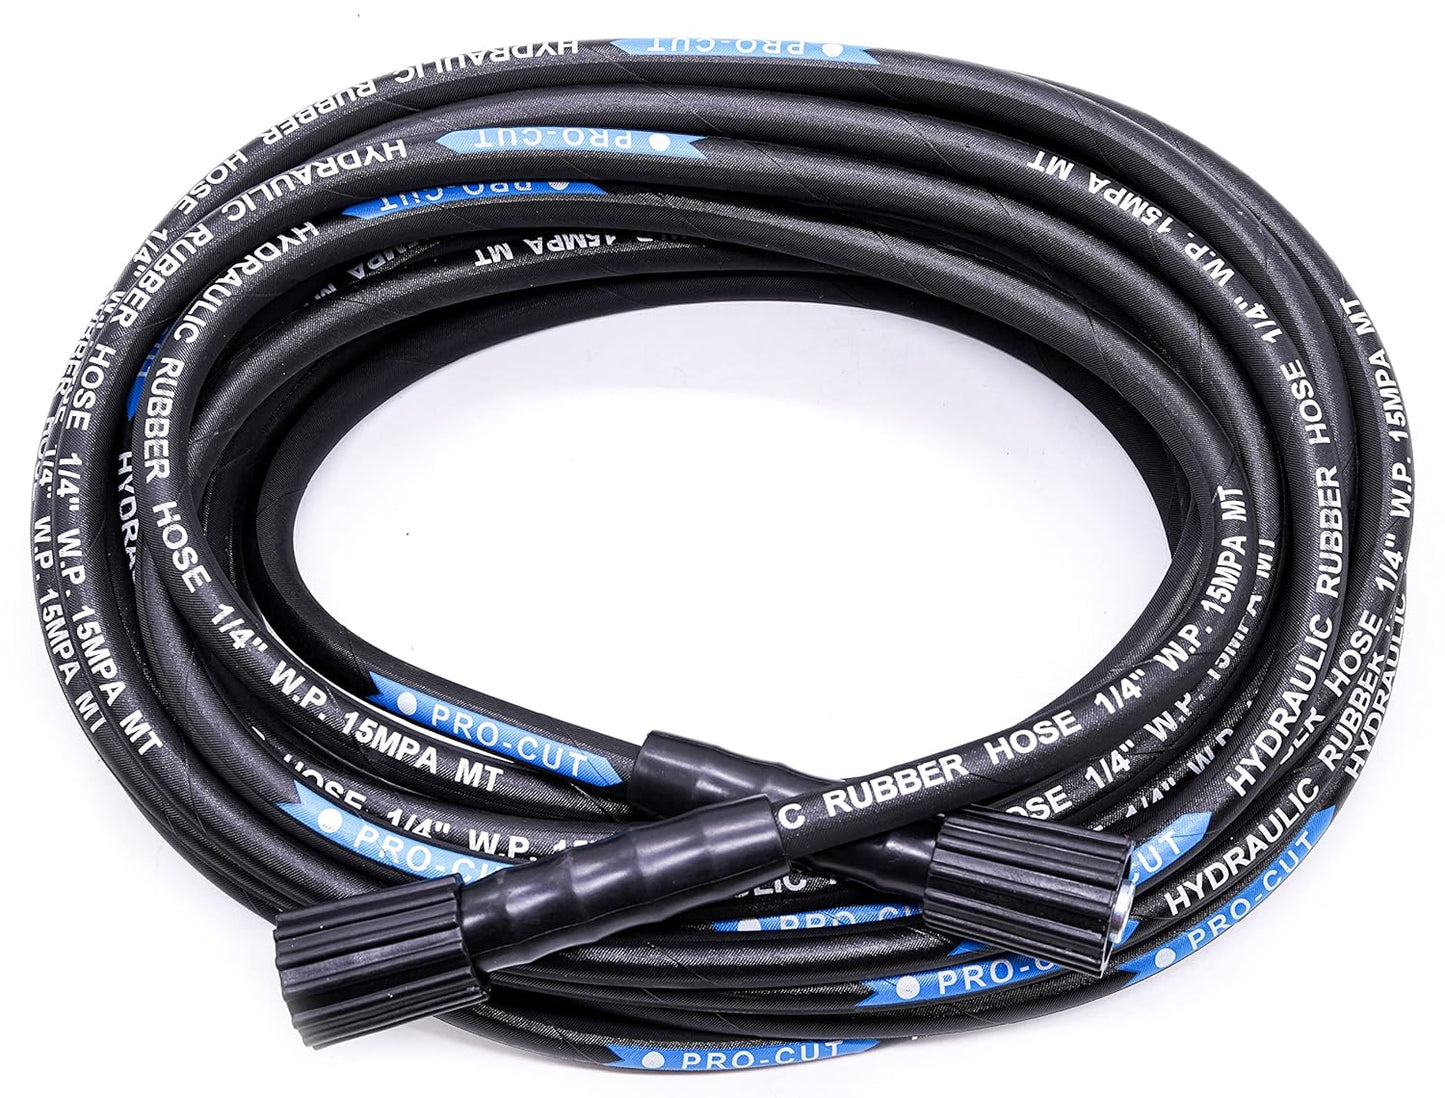 STARQ 15 Meter Pressure Washer Hose Pipe Upto 2150 Psi Heavy Duty Black Molded Pipe